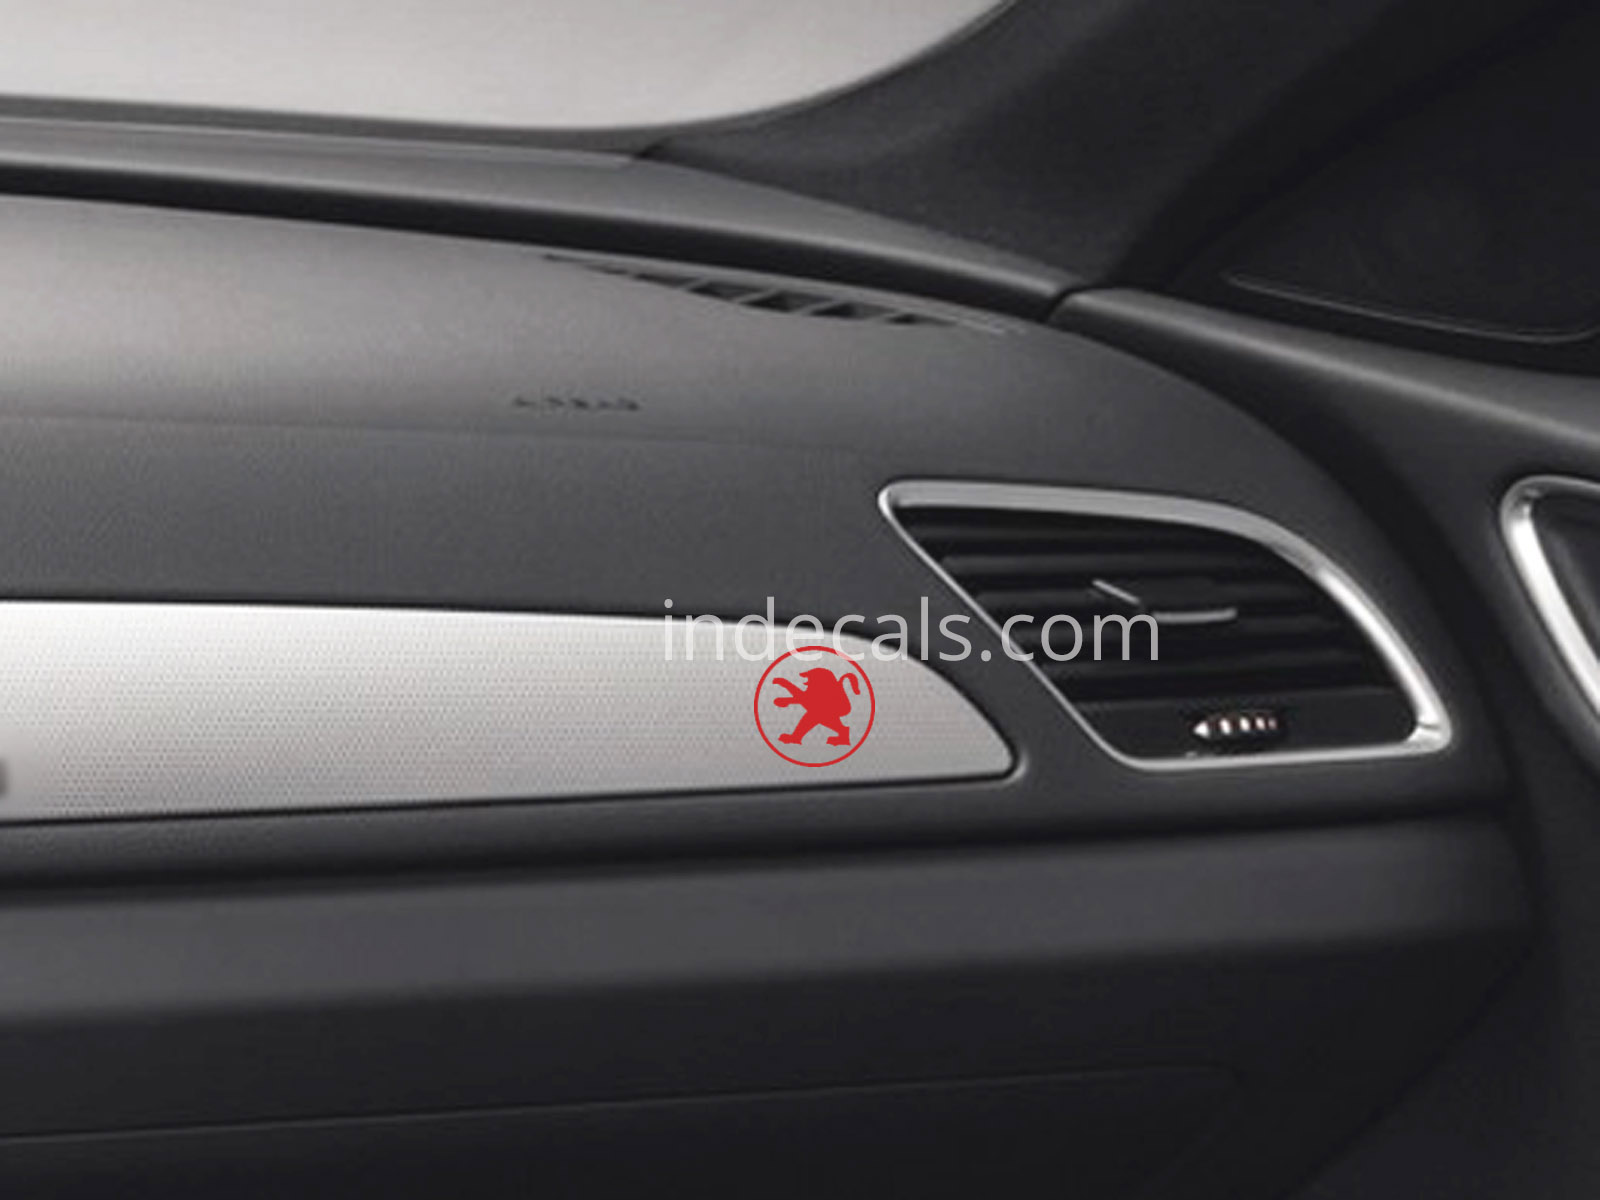 3 x Peugeot Stickers for Dash Trim - Red